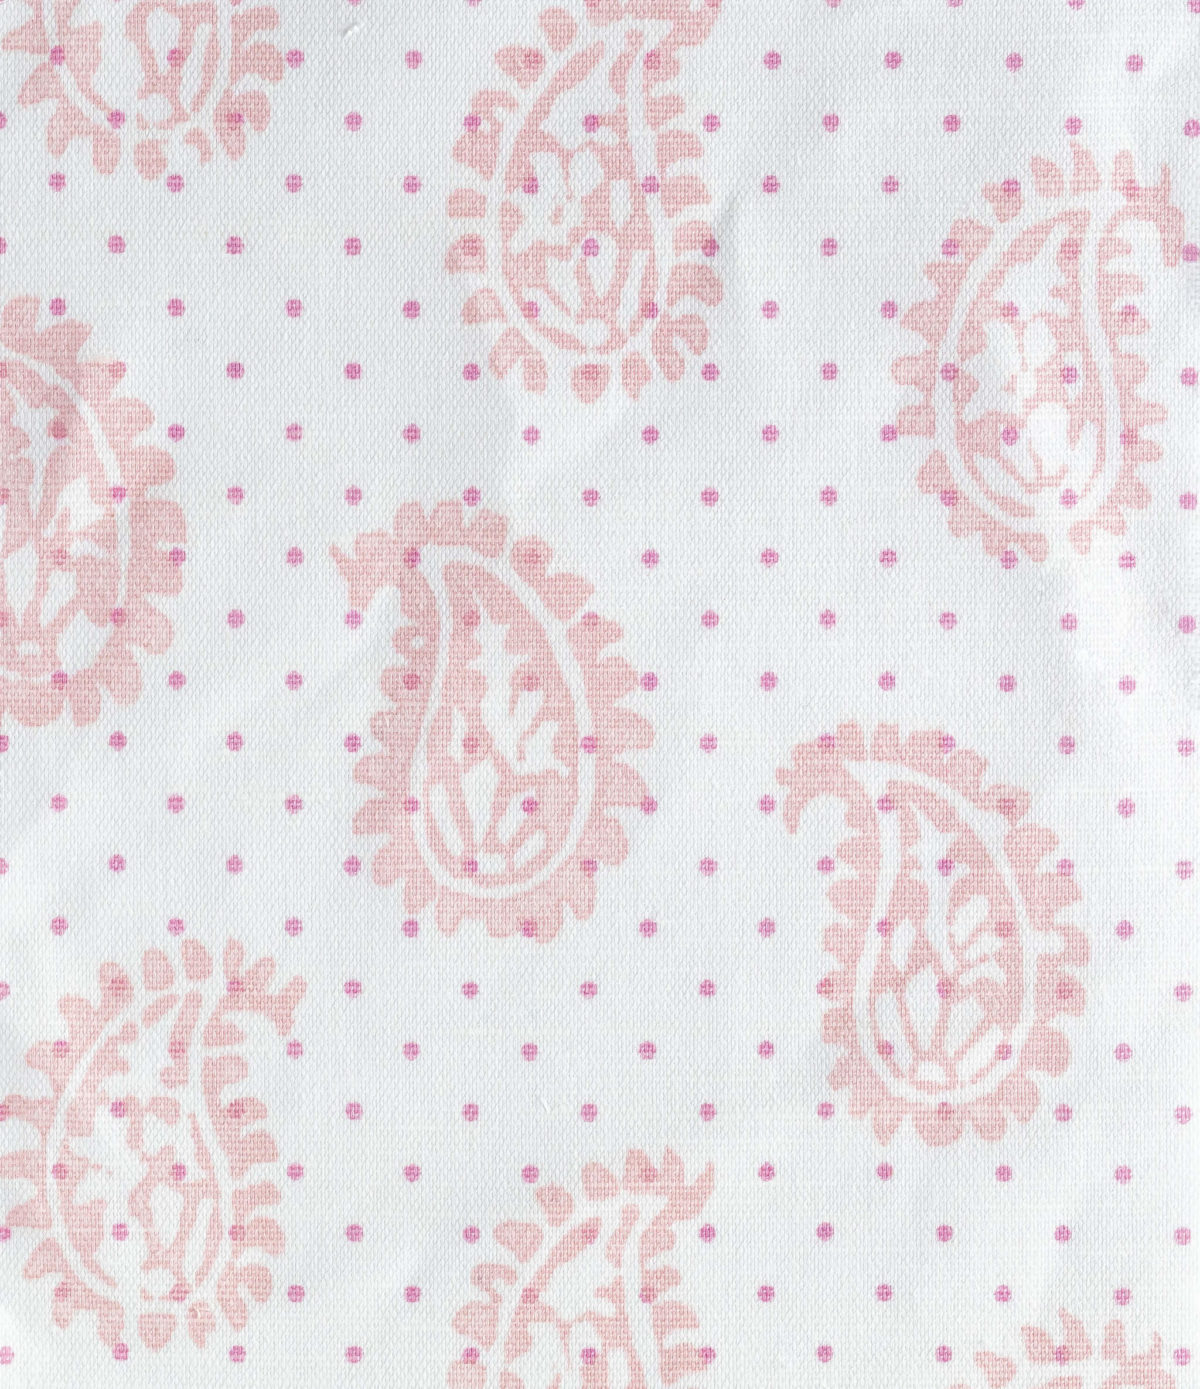 Firenze Pink with Lavender Dots Fabric